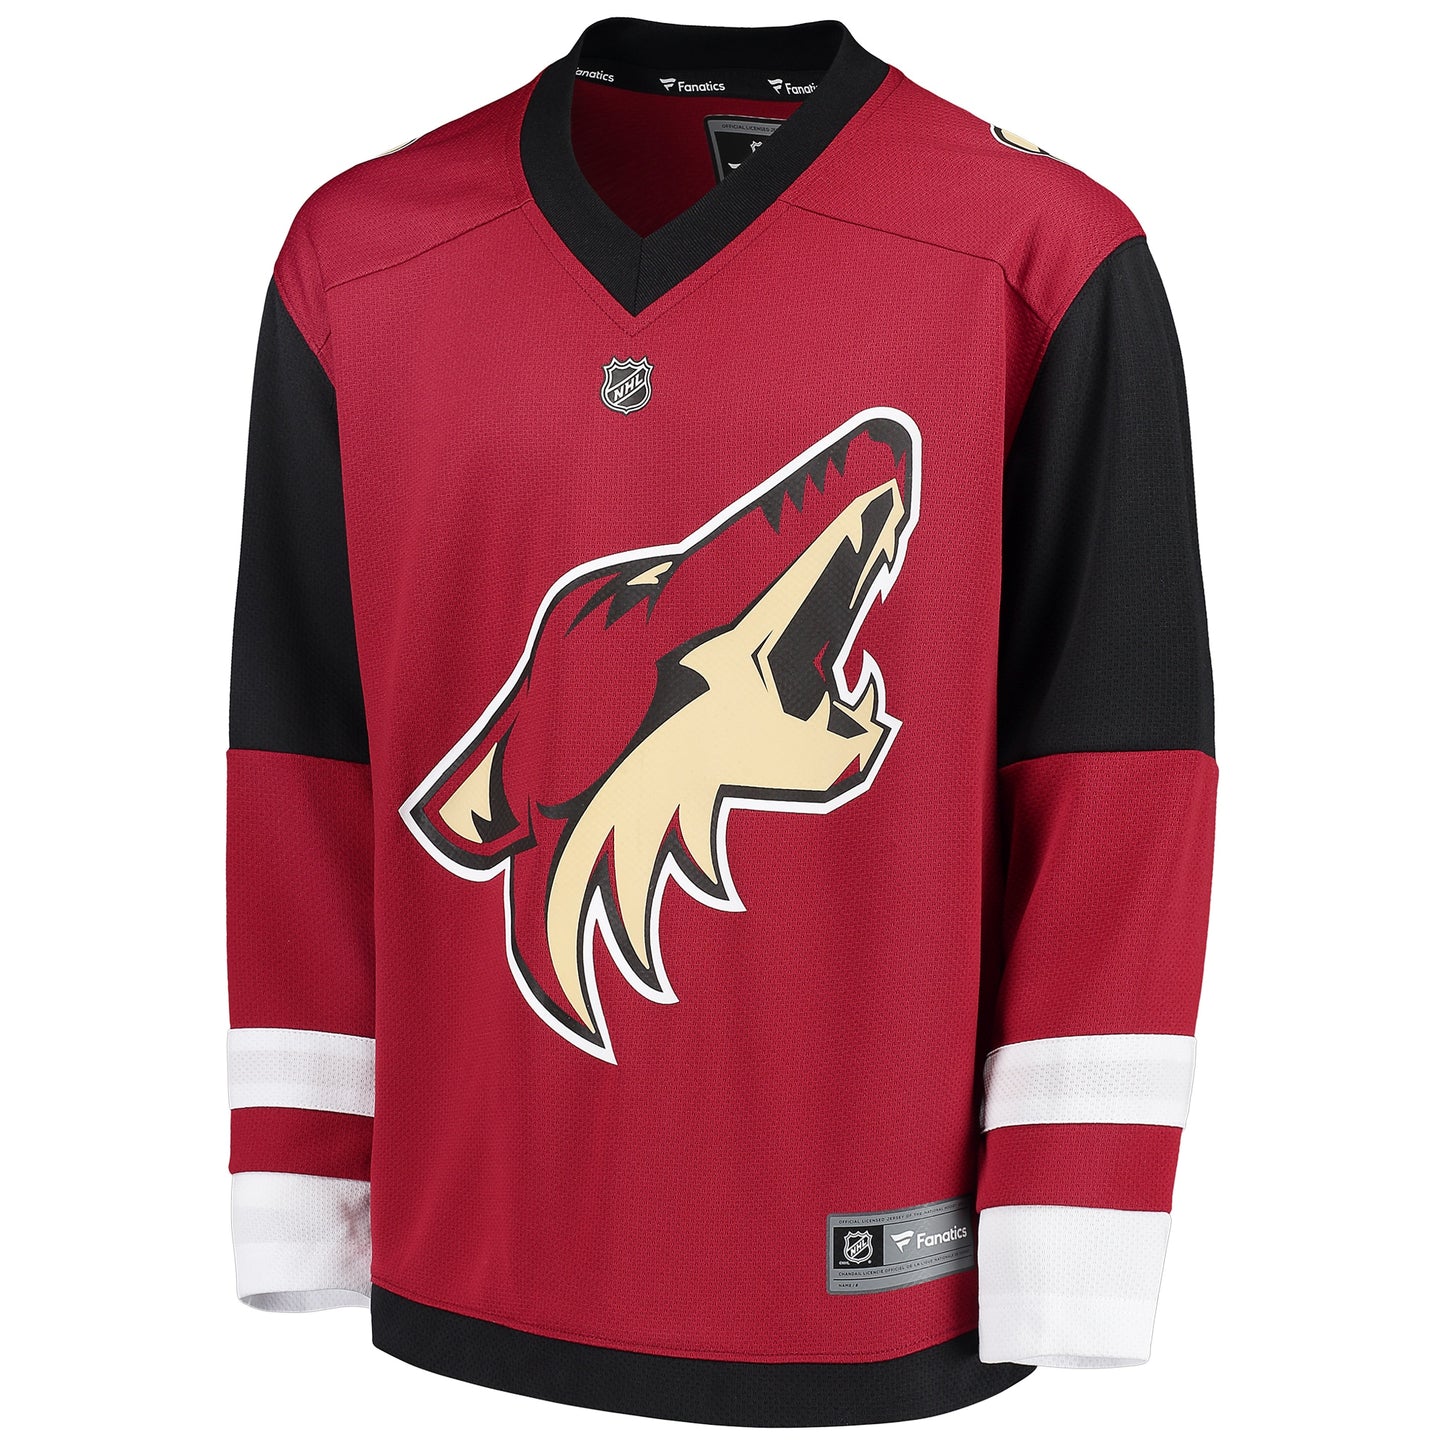 Arizona Coyotes Fanatics Branded Youth Home Replica Blank Jersey - Red